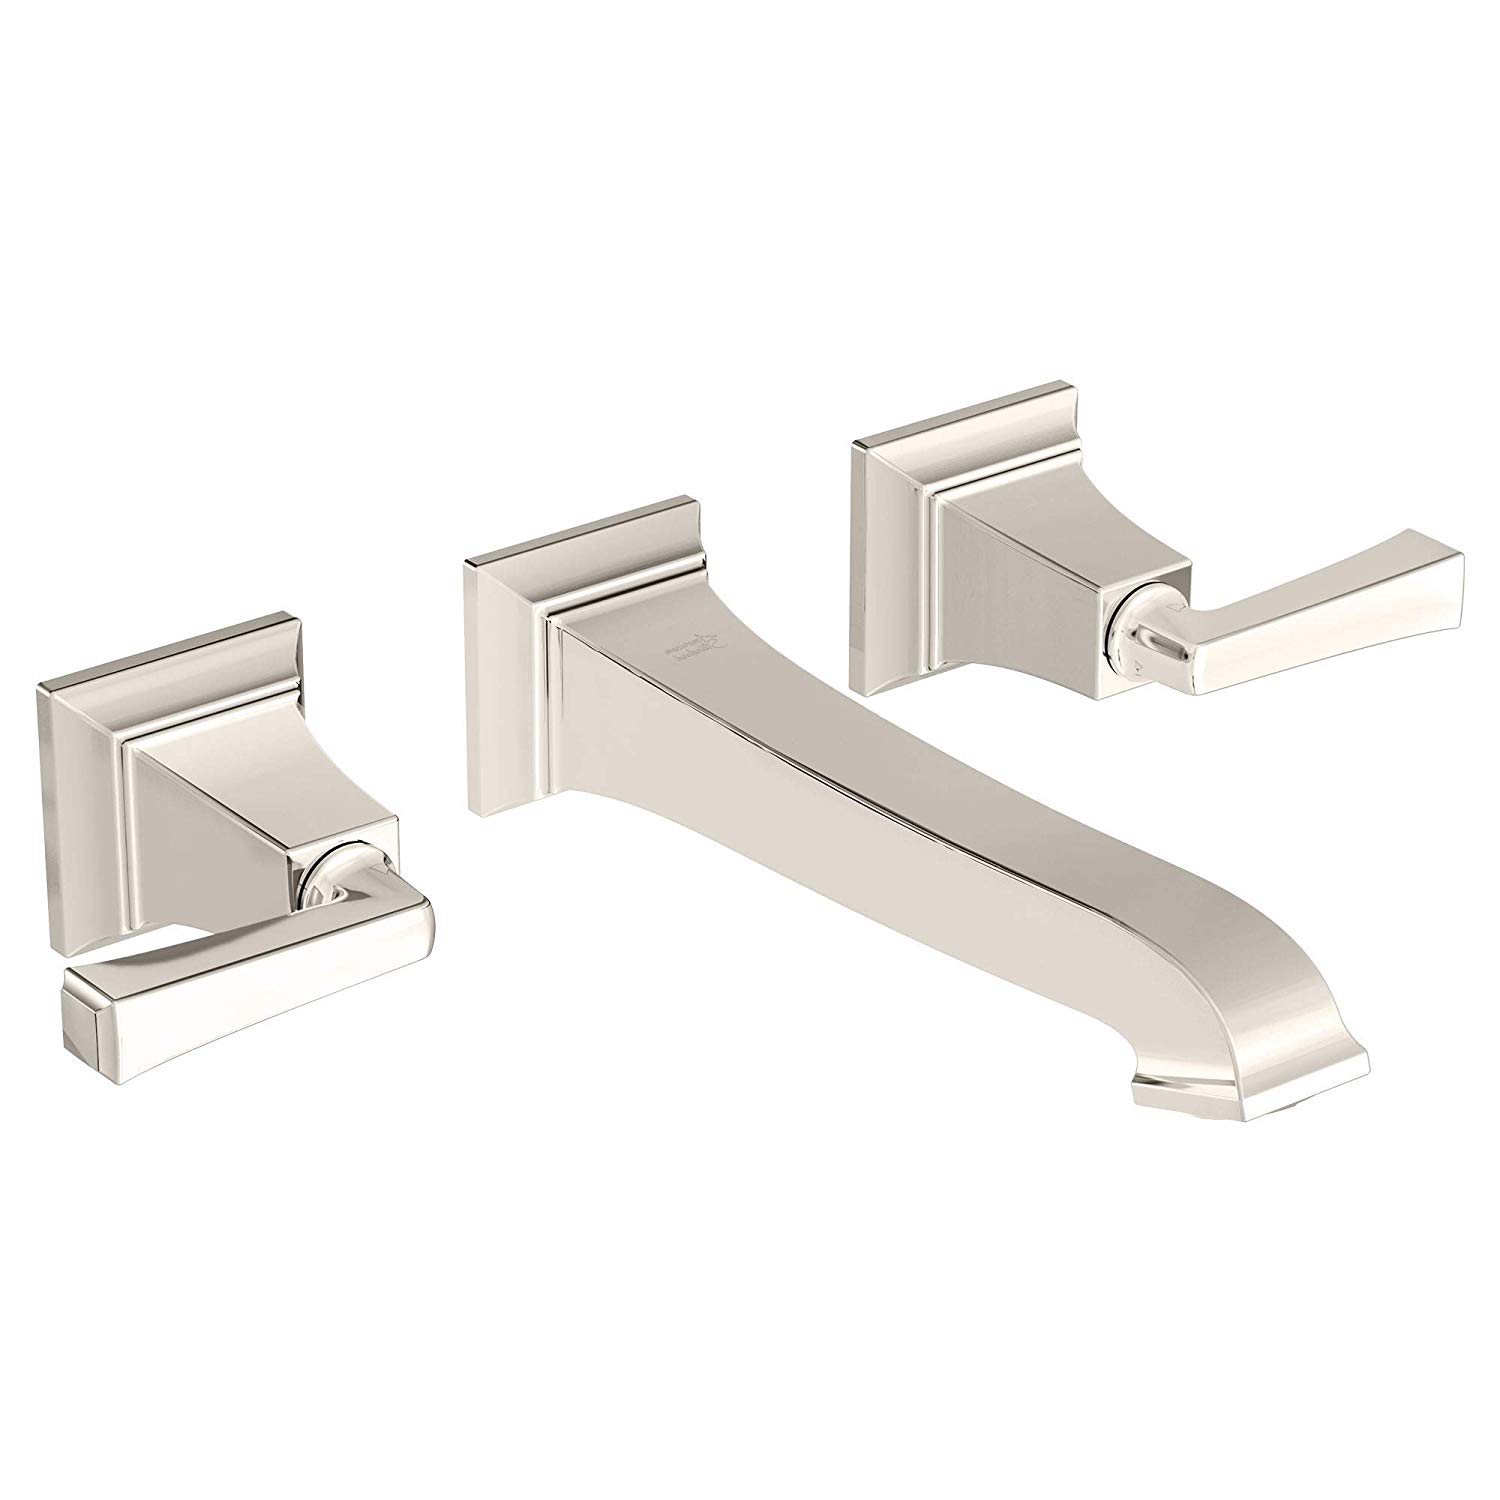 Town Square S Wall Mount Lav Faucet W/Lever Handles In Polished Nickel PVD